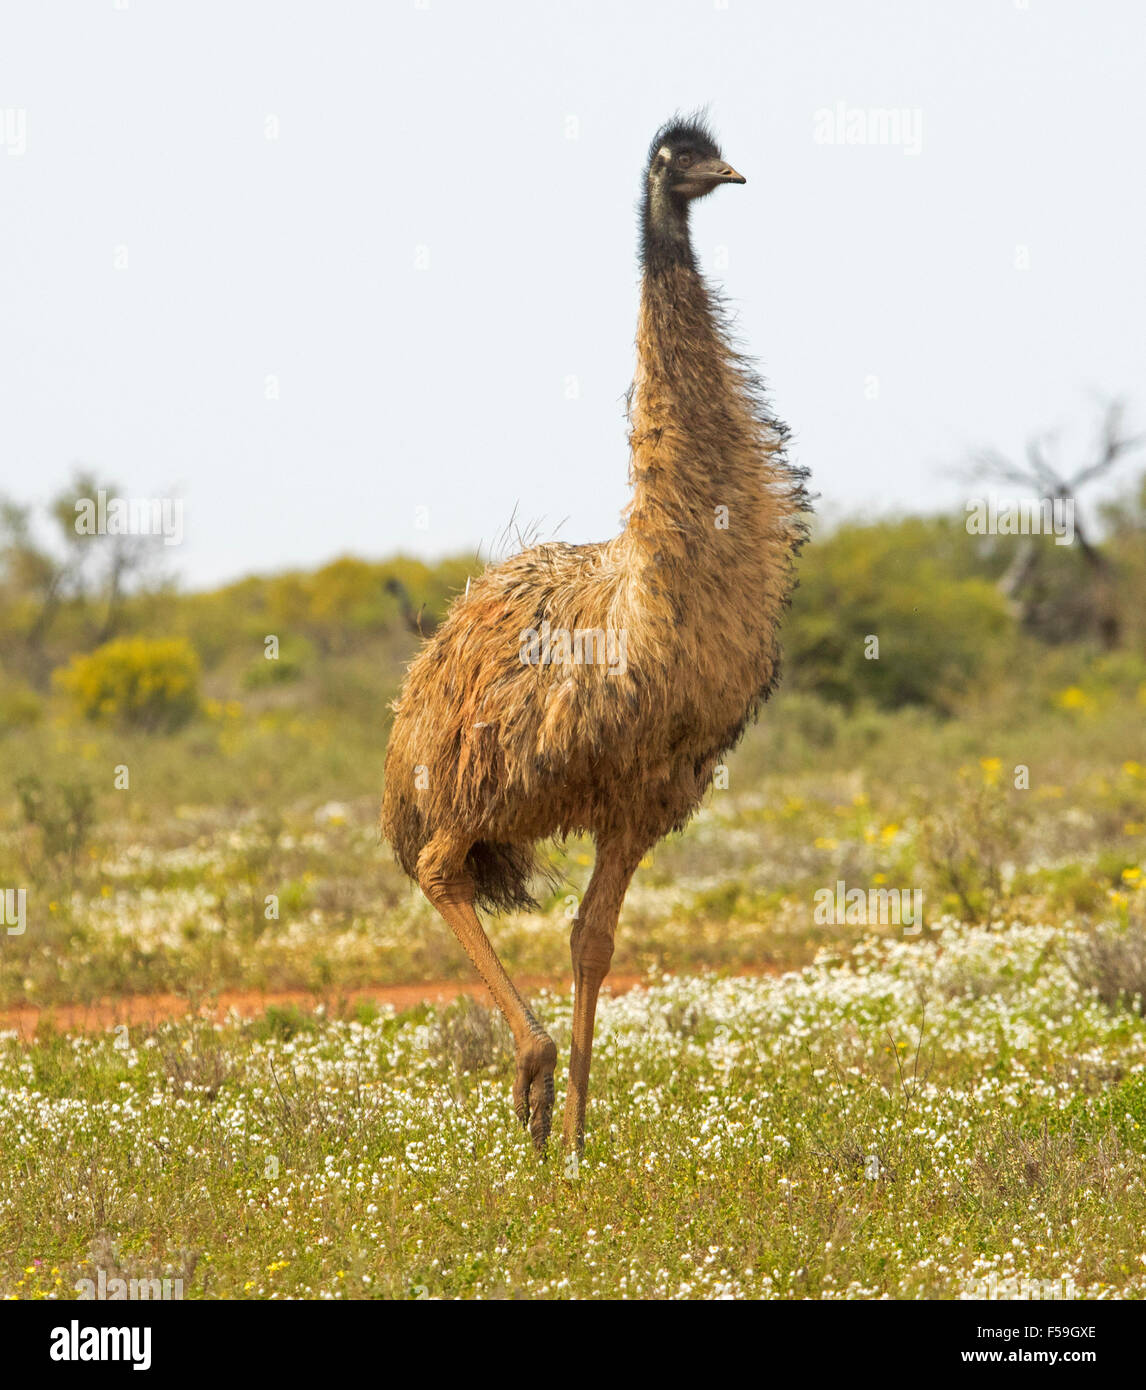 Close-up view of large male emu wandering through field of wildflowers after rain in Flinders Ranges outback South Australia Stock Photo